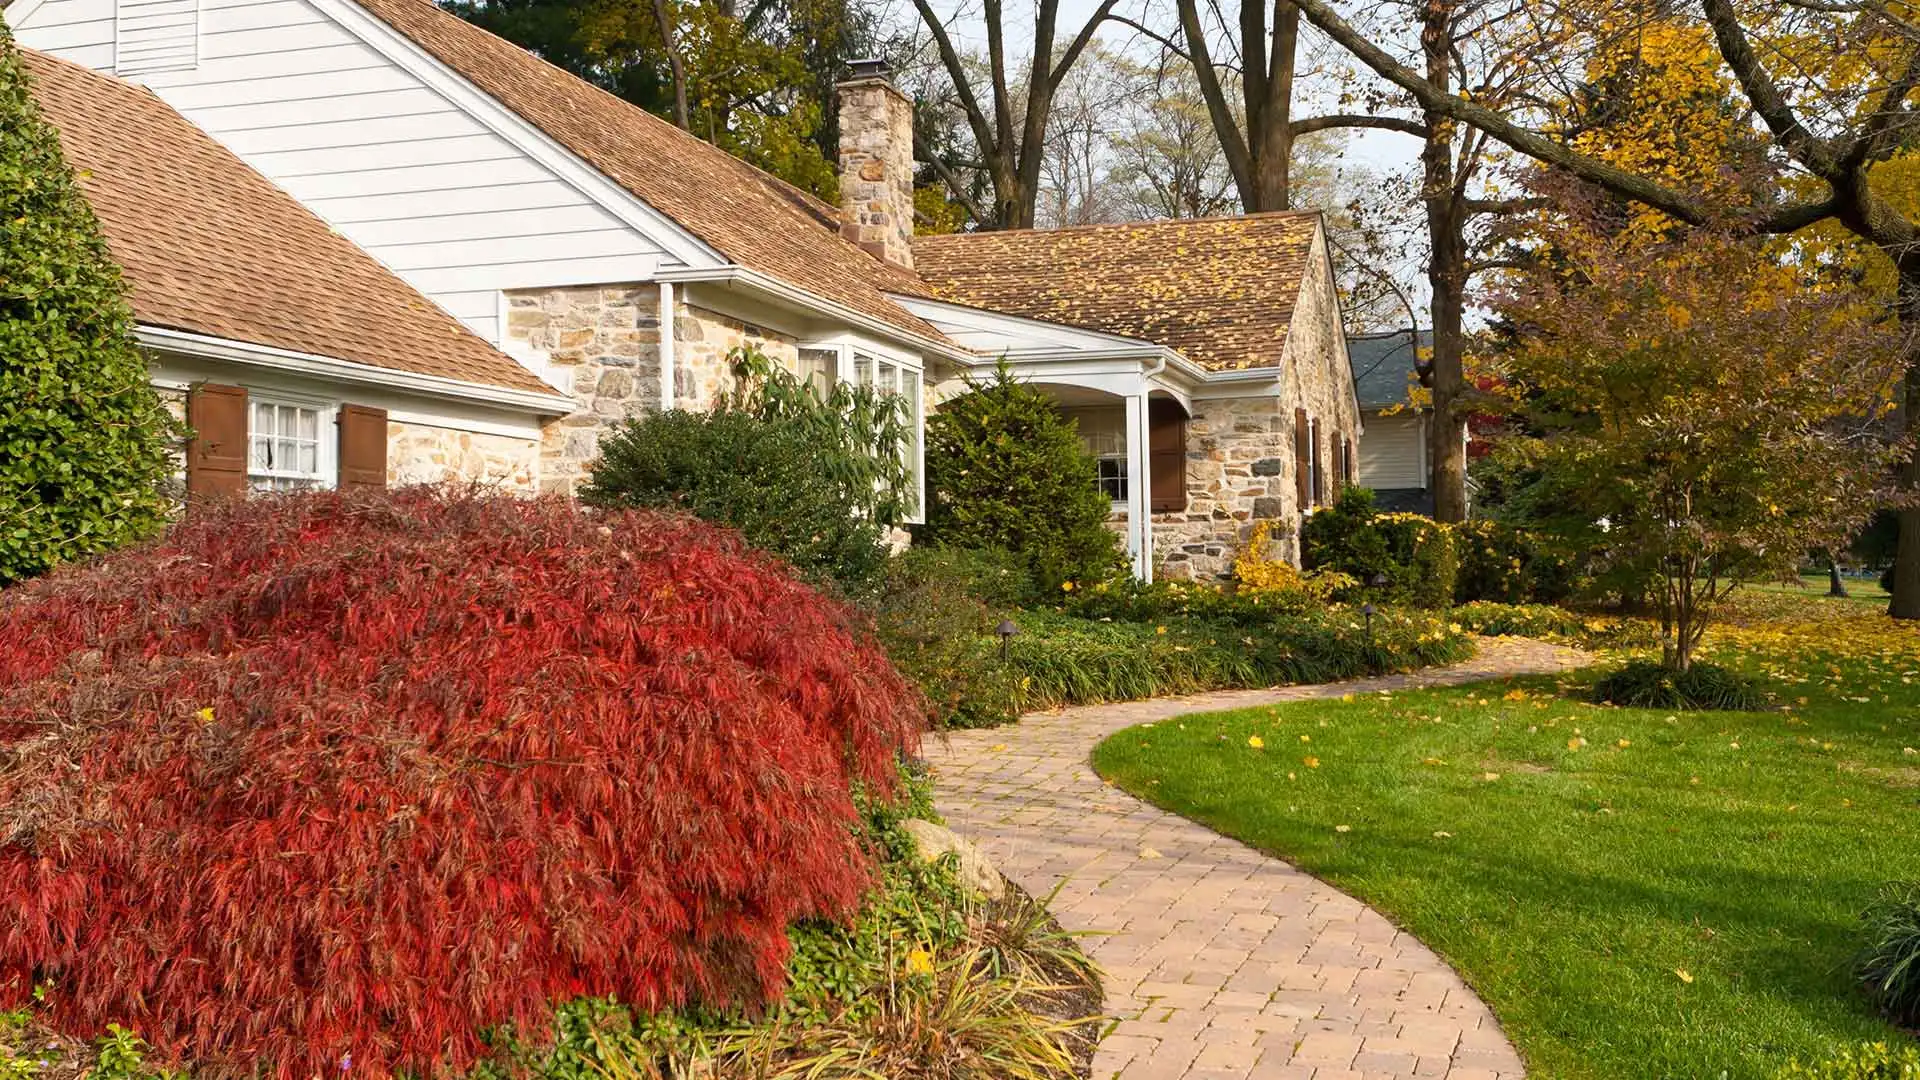 A yard in Waterloo, IL that requires yard cleanup services.